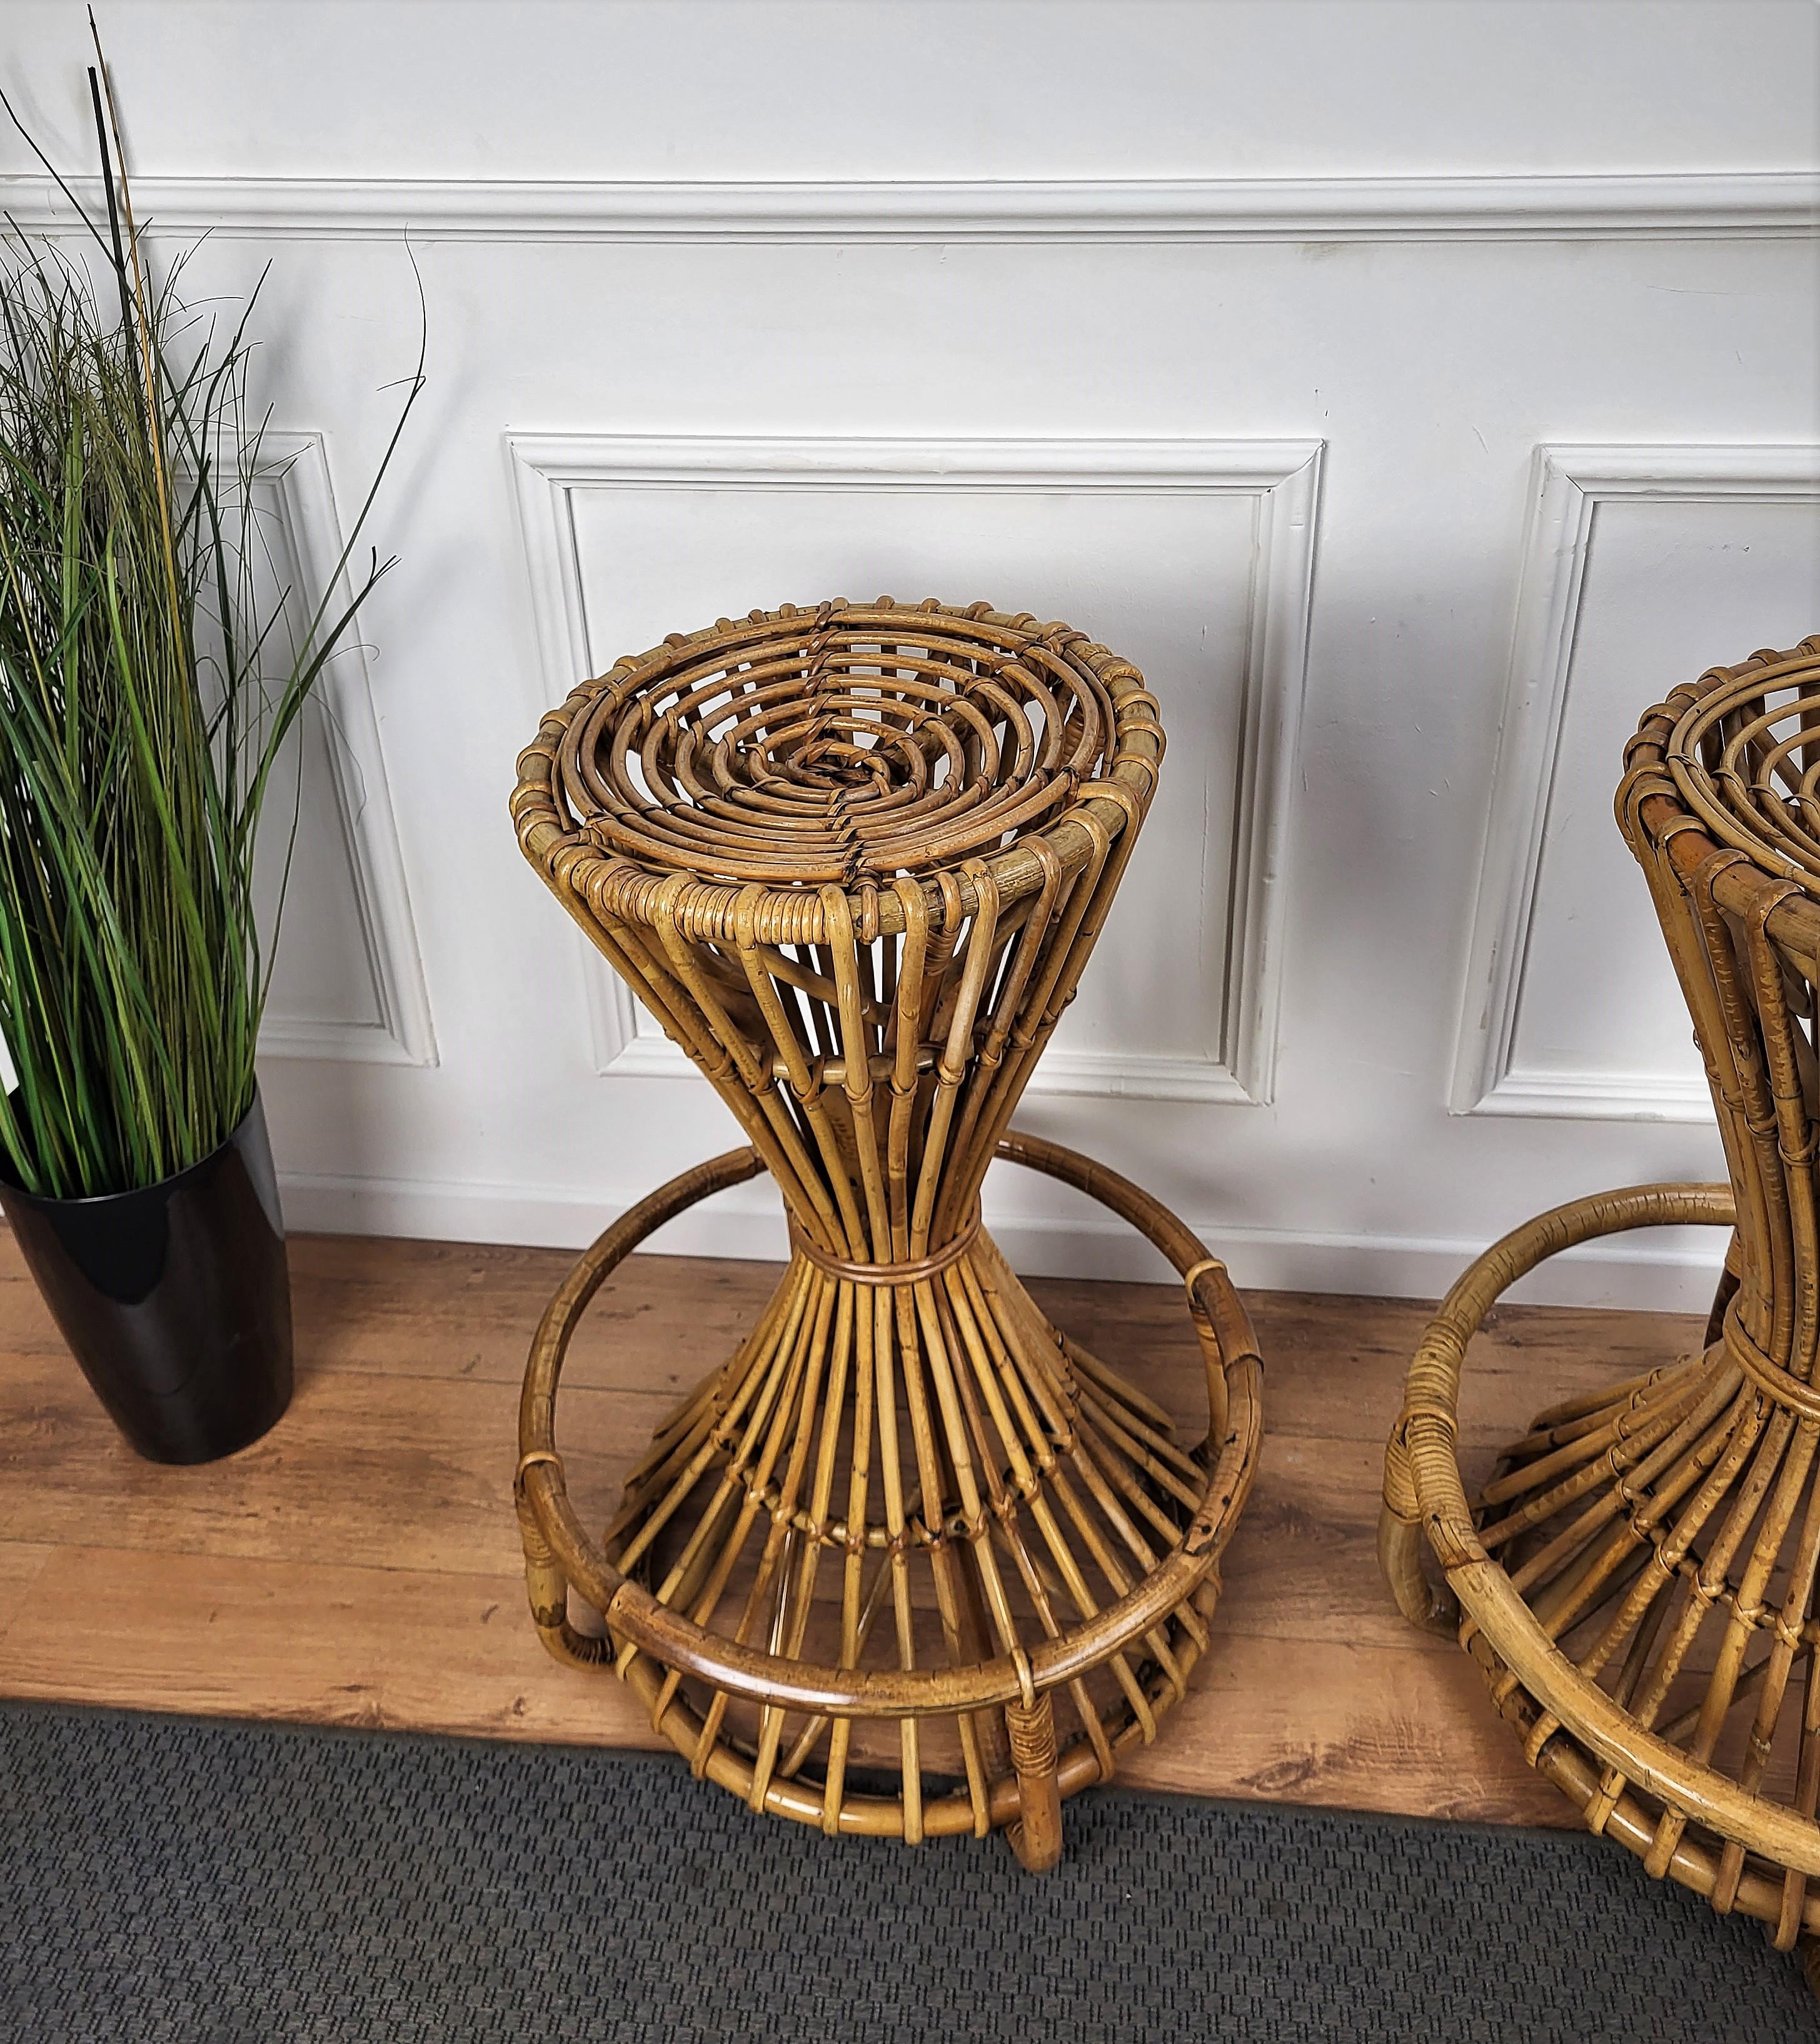 Organic Modern Pair of 1960s Italian Bamboo Bohemian French Riviera Round Bar Stools Chairs For Sale